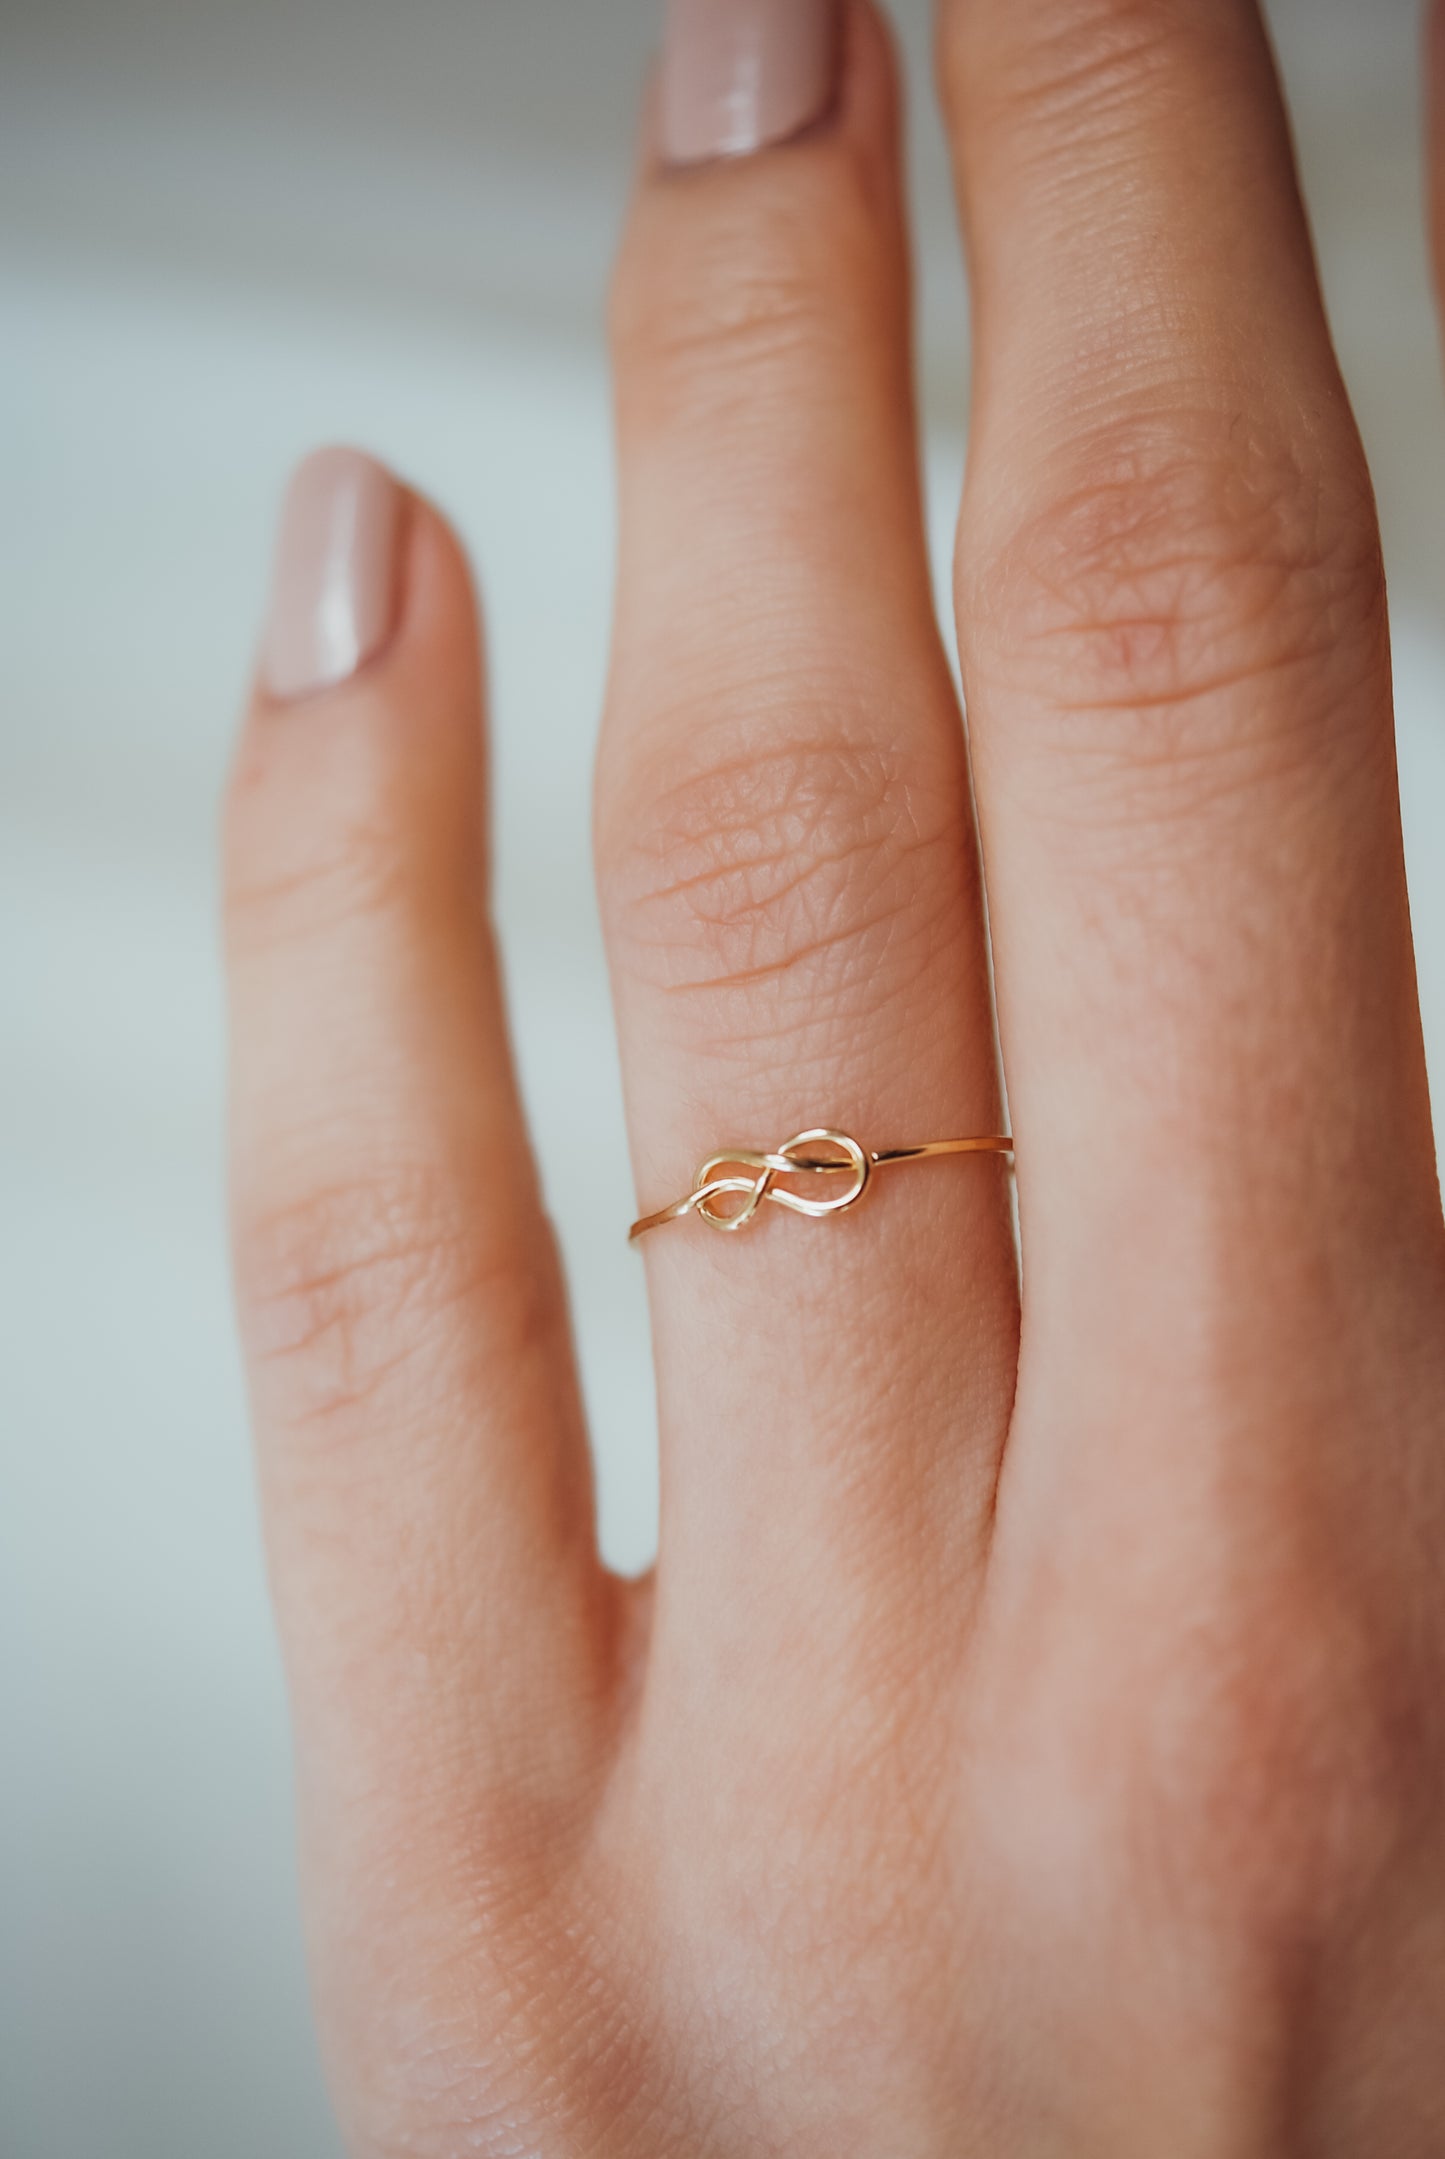 Infinity Knot Ring, Solid 14K Gold